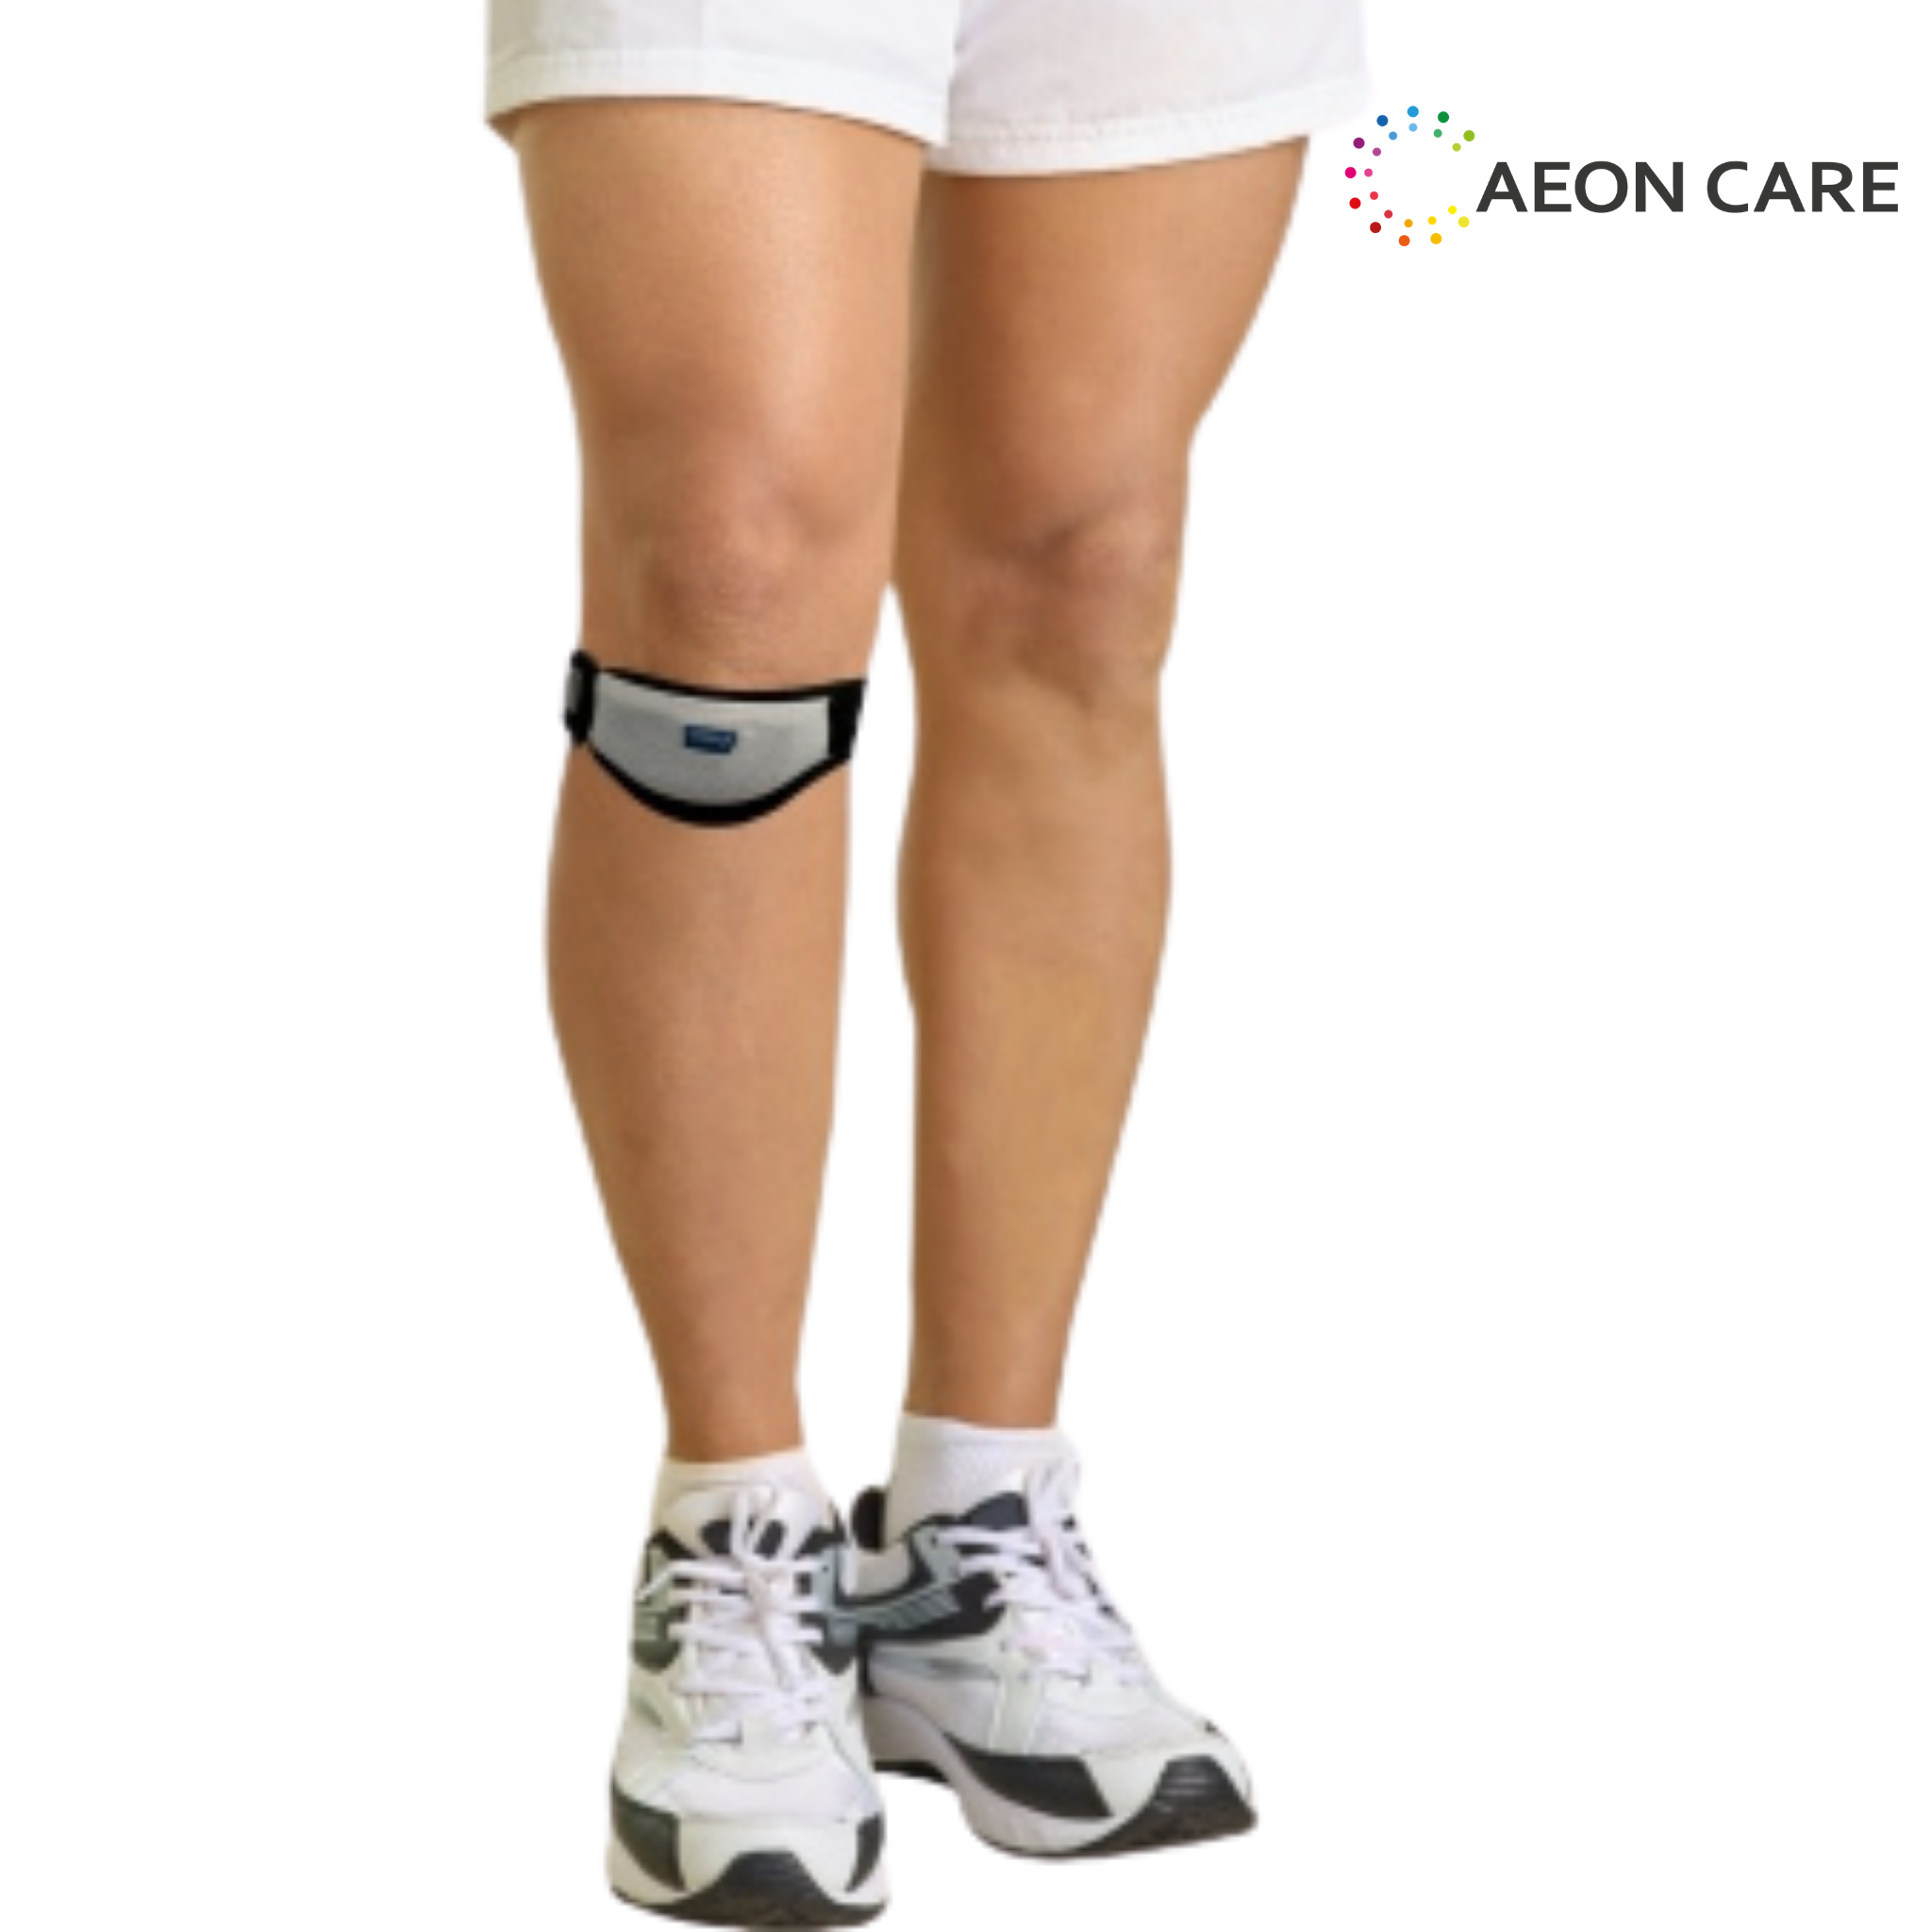 patella support knee brace is used for knee support. patella support strap for running